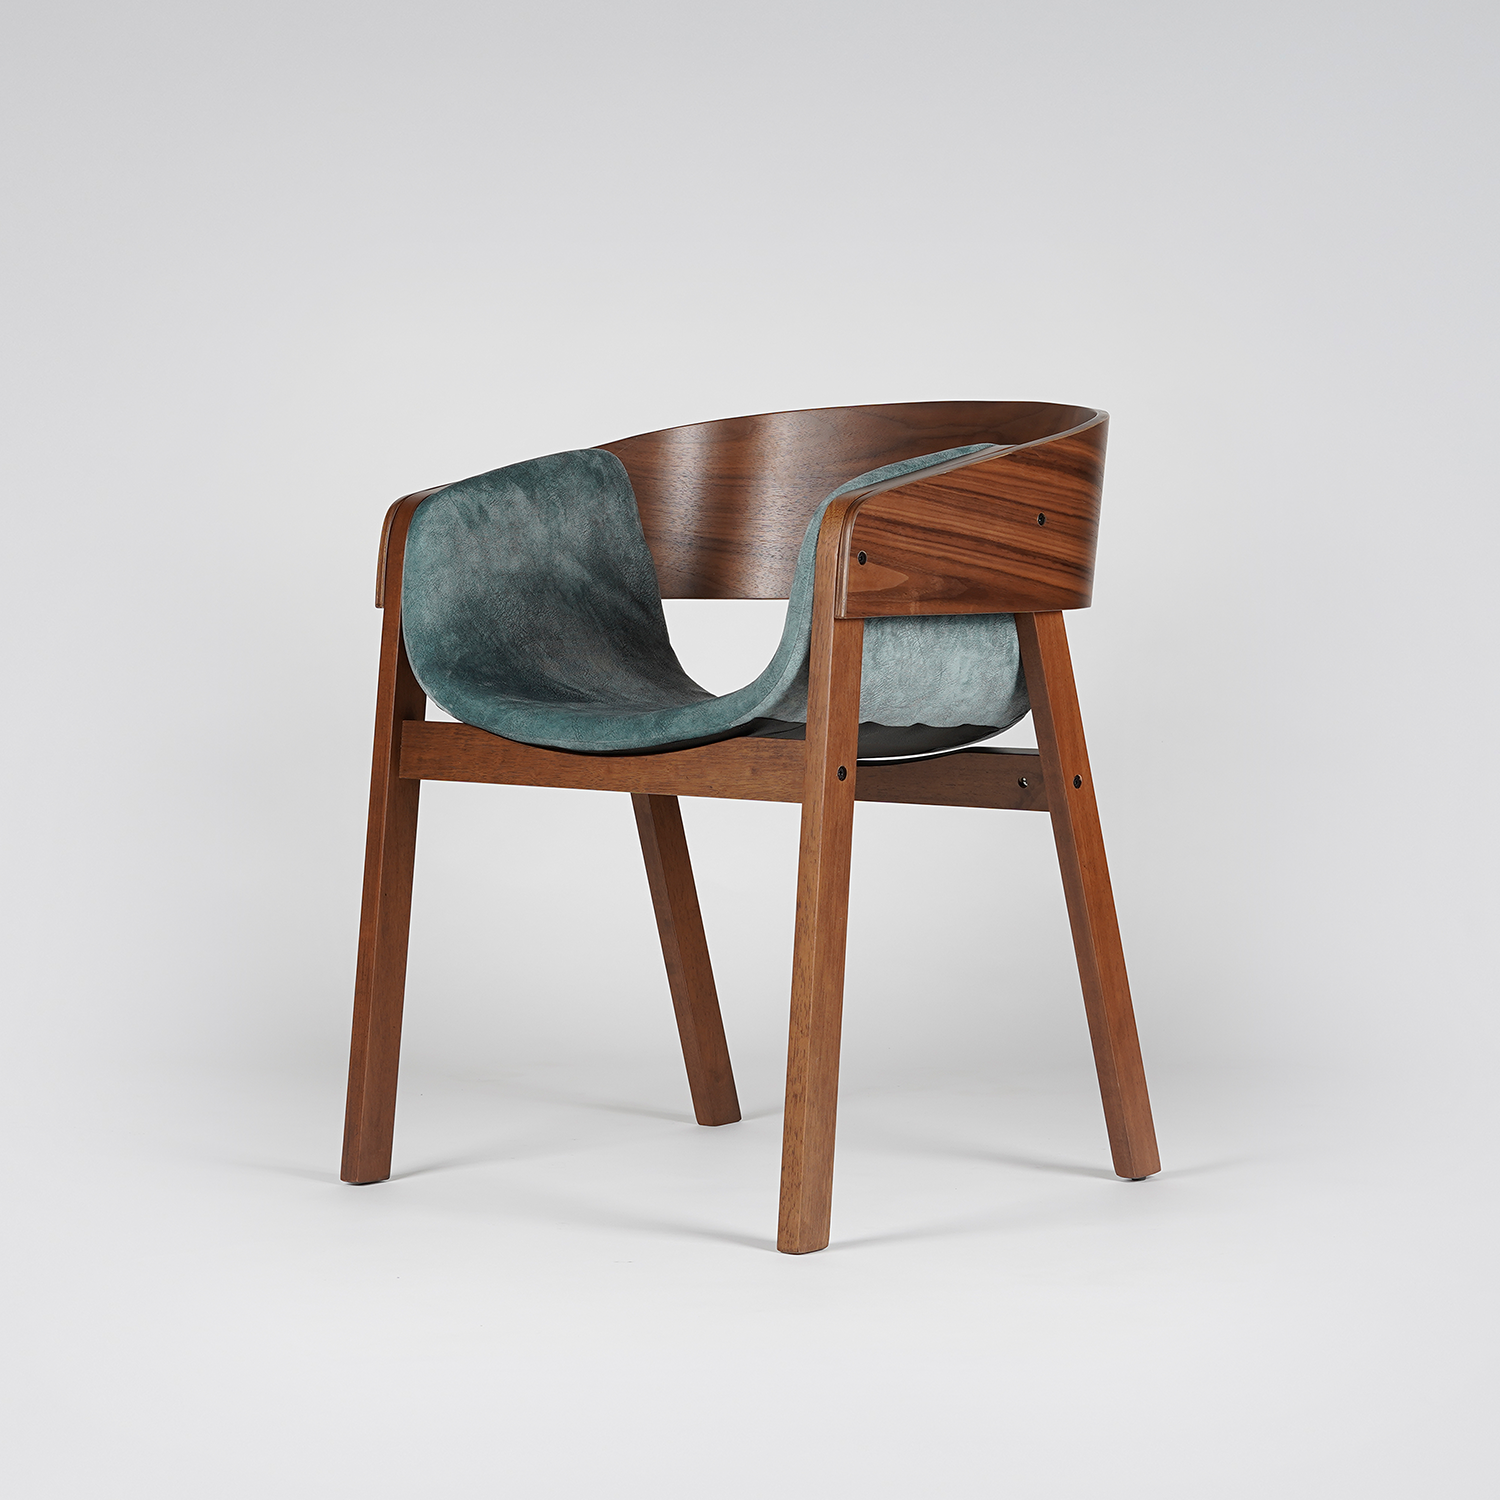 Kube Wooden Dining Chair with Cushion Seat